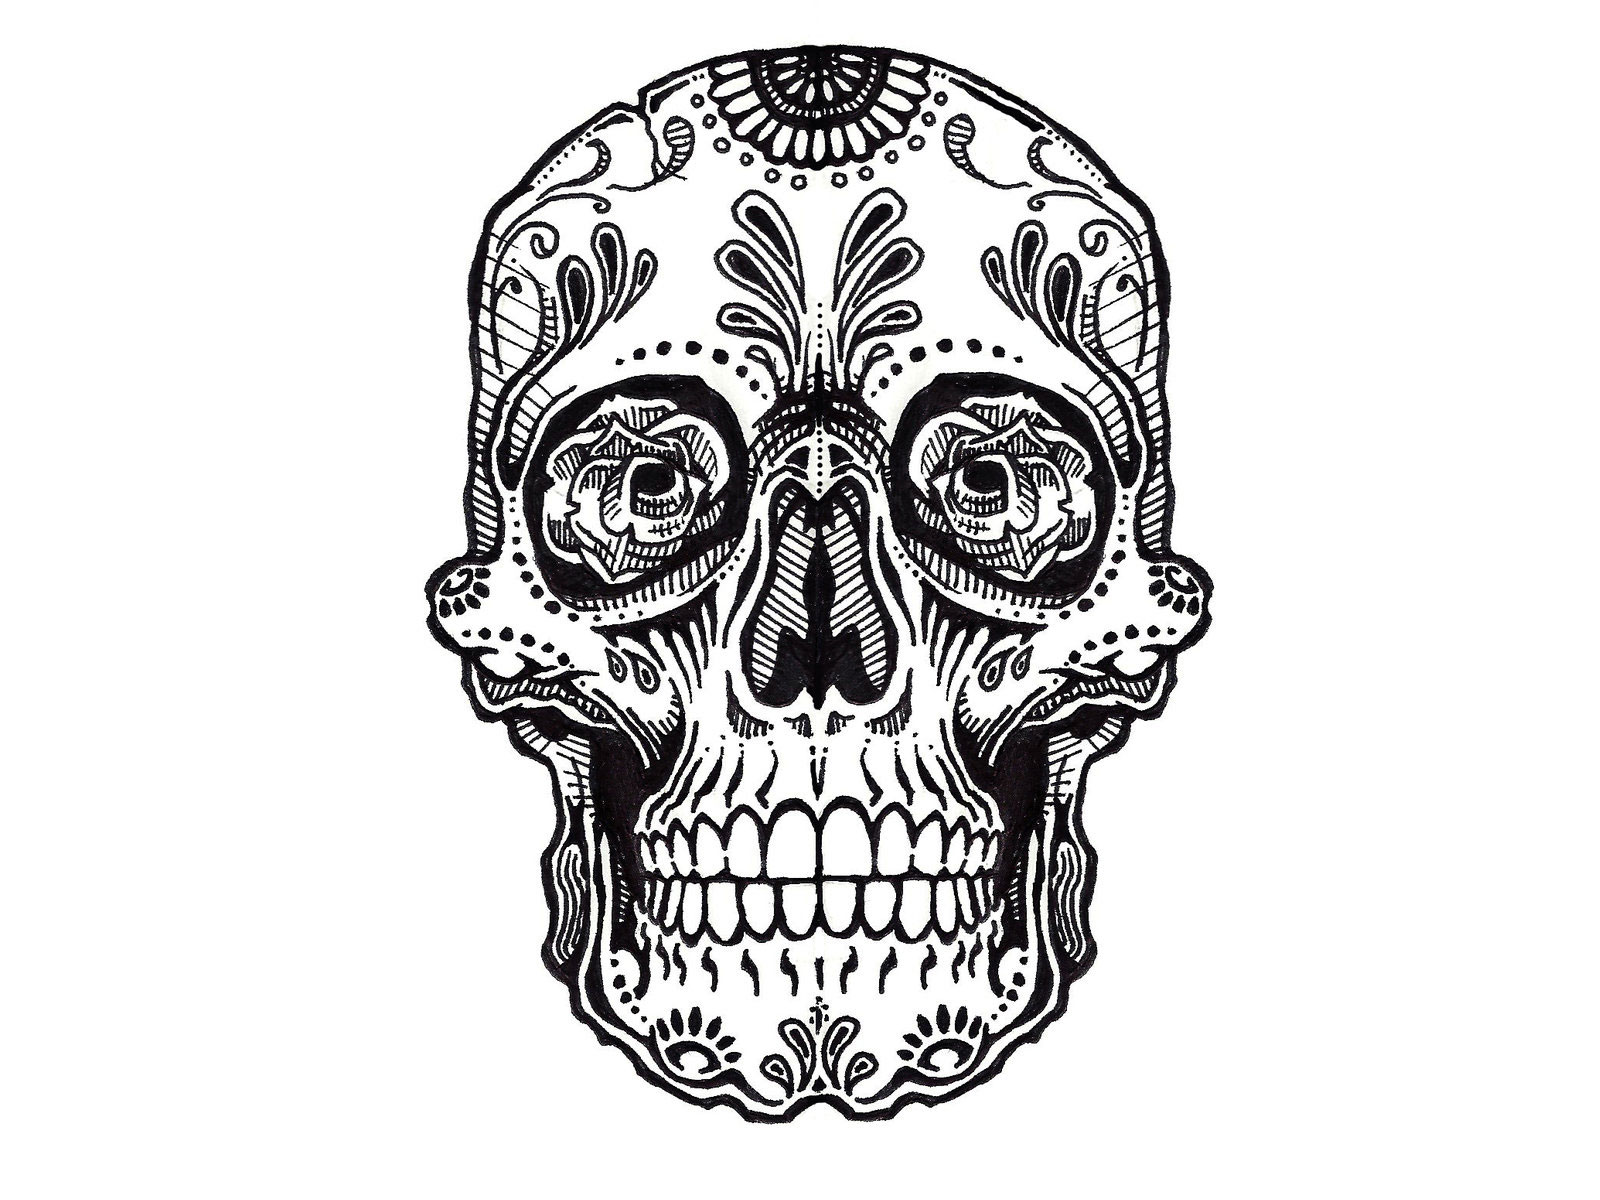 Skull Tattoo Design Hq Backgrounds Hd Wallpapers Gallery 